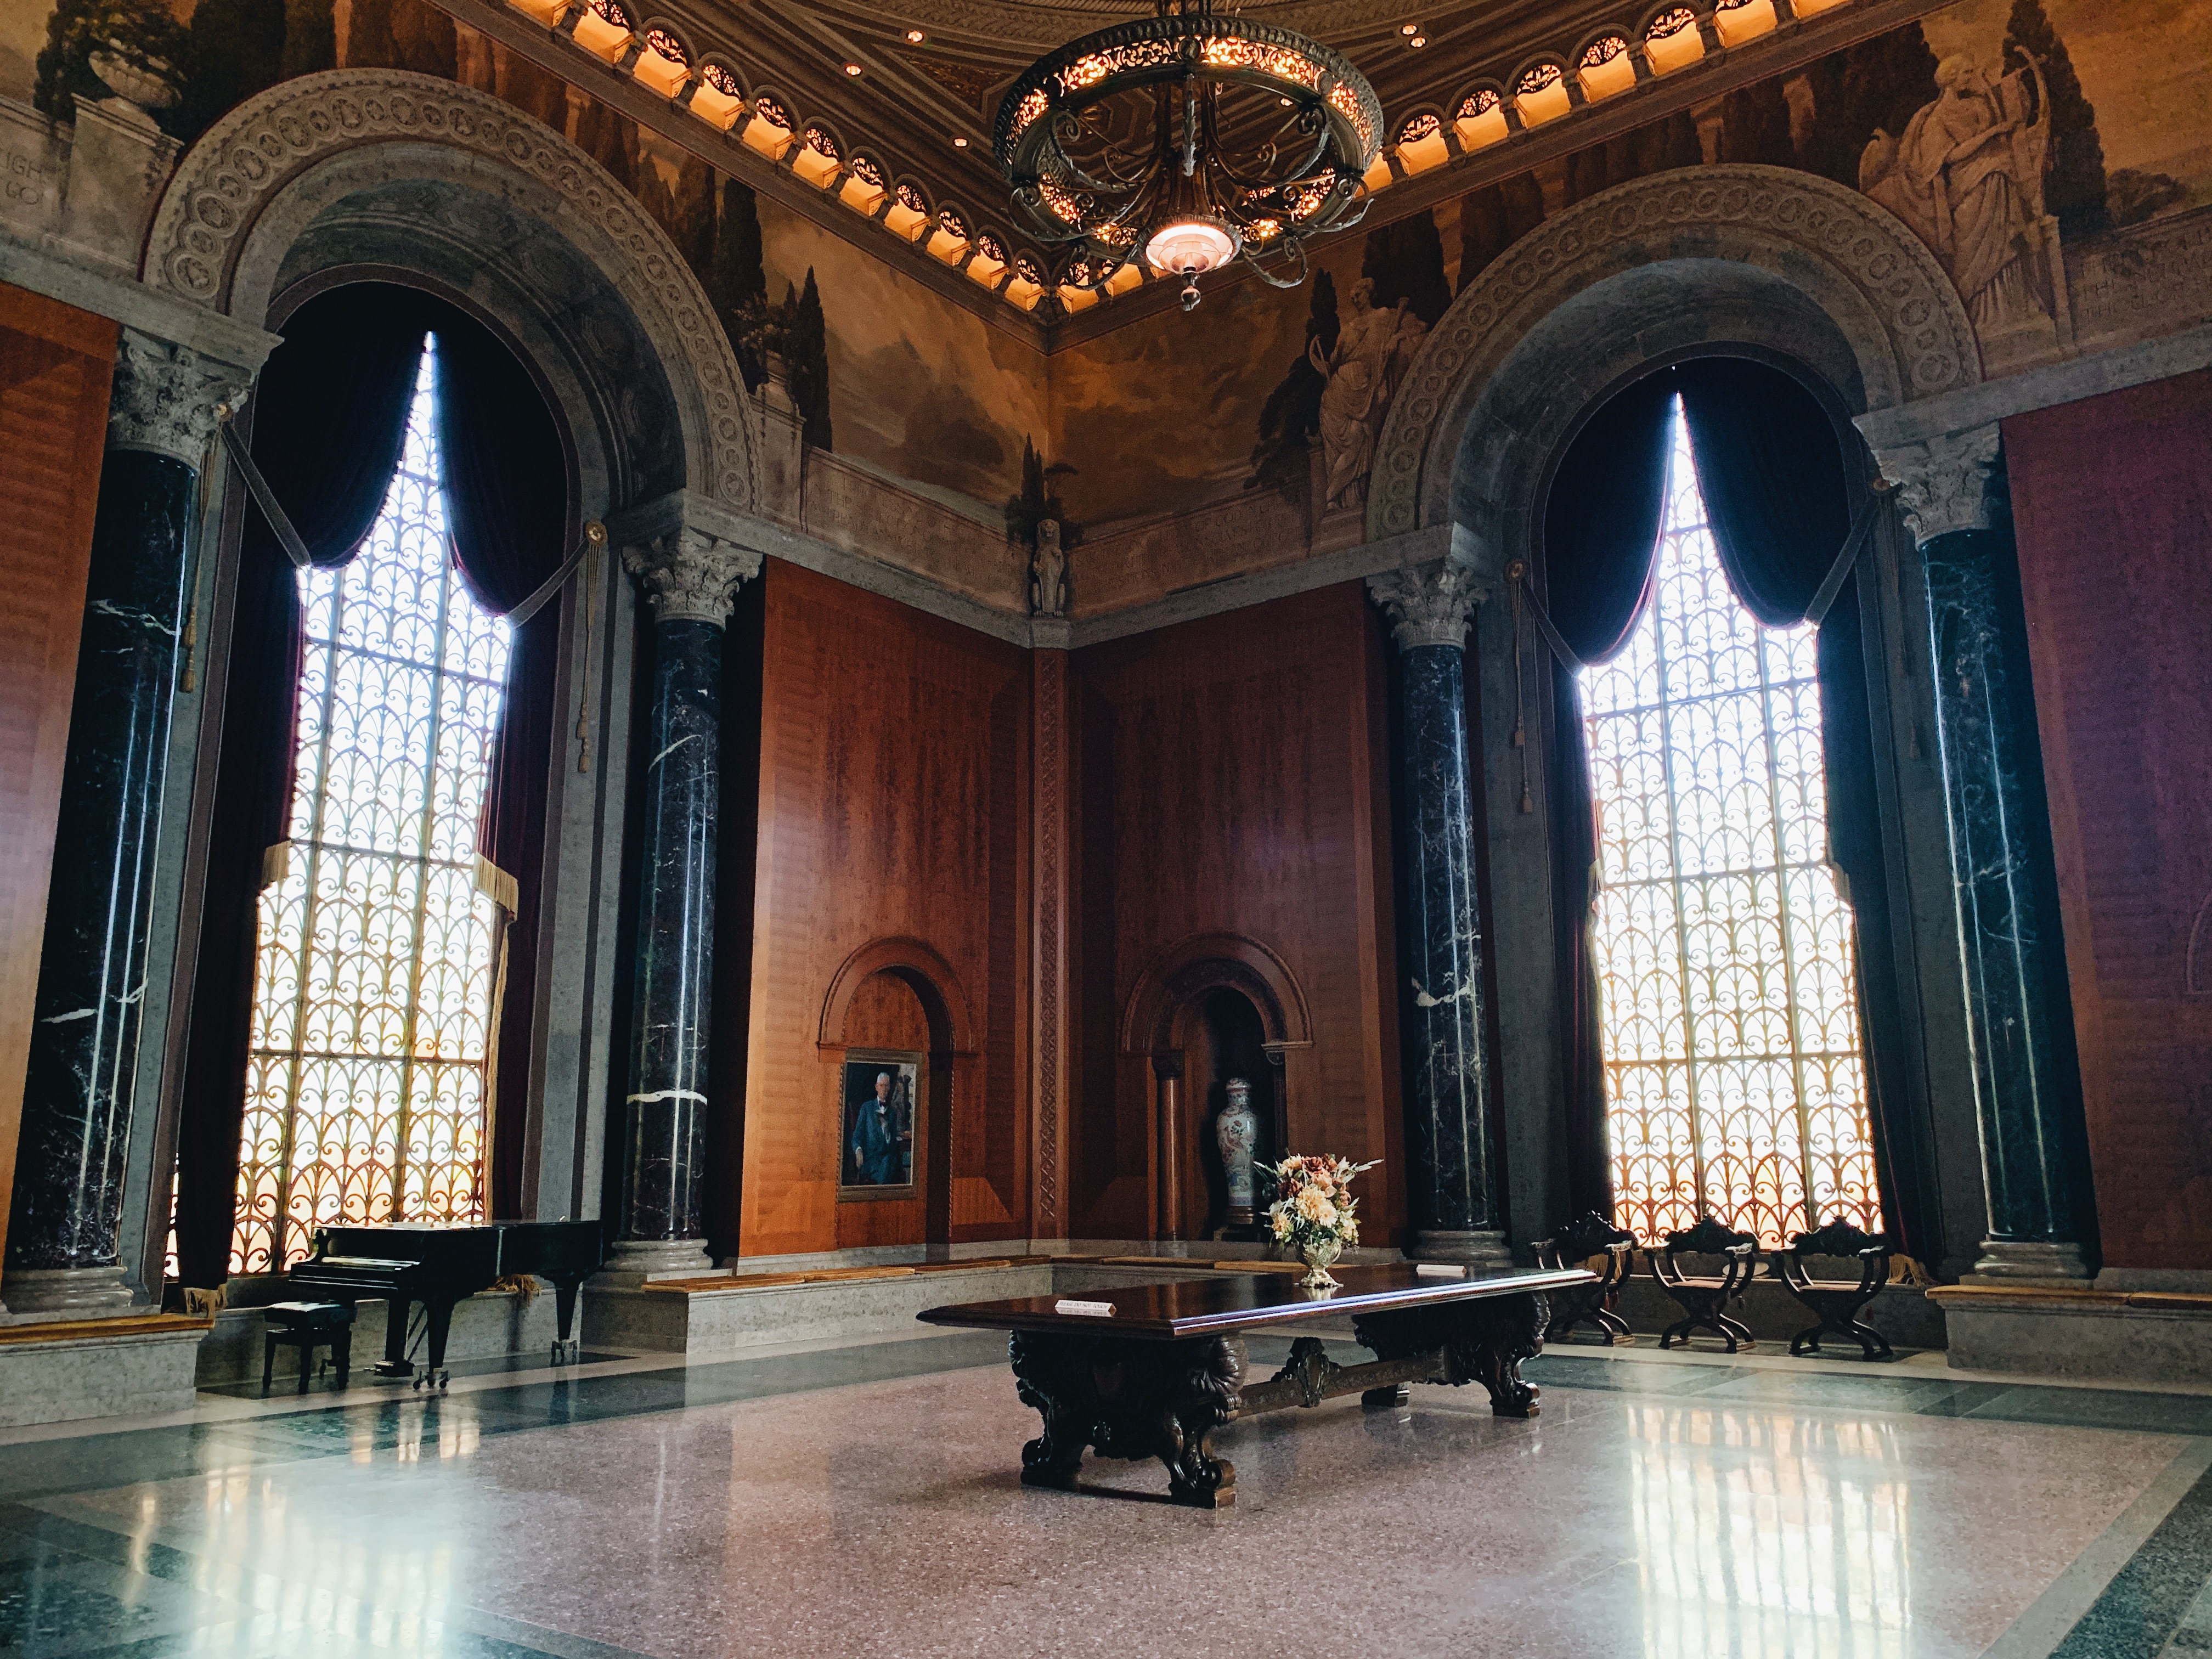 Armstrong Browning Library's Foyer of Meditation